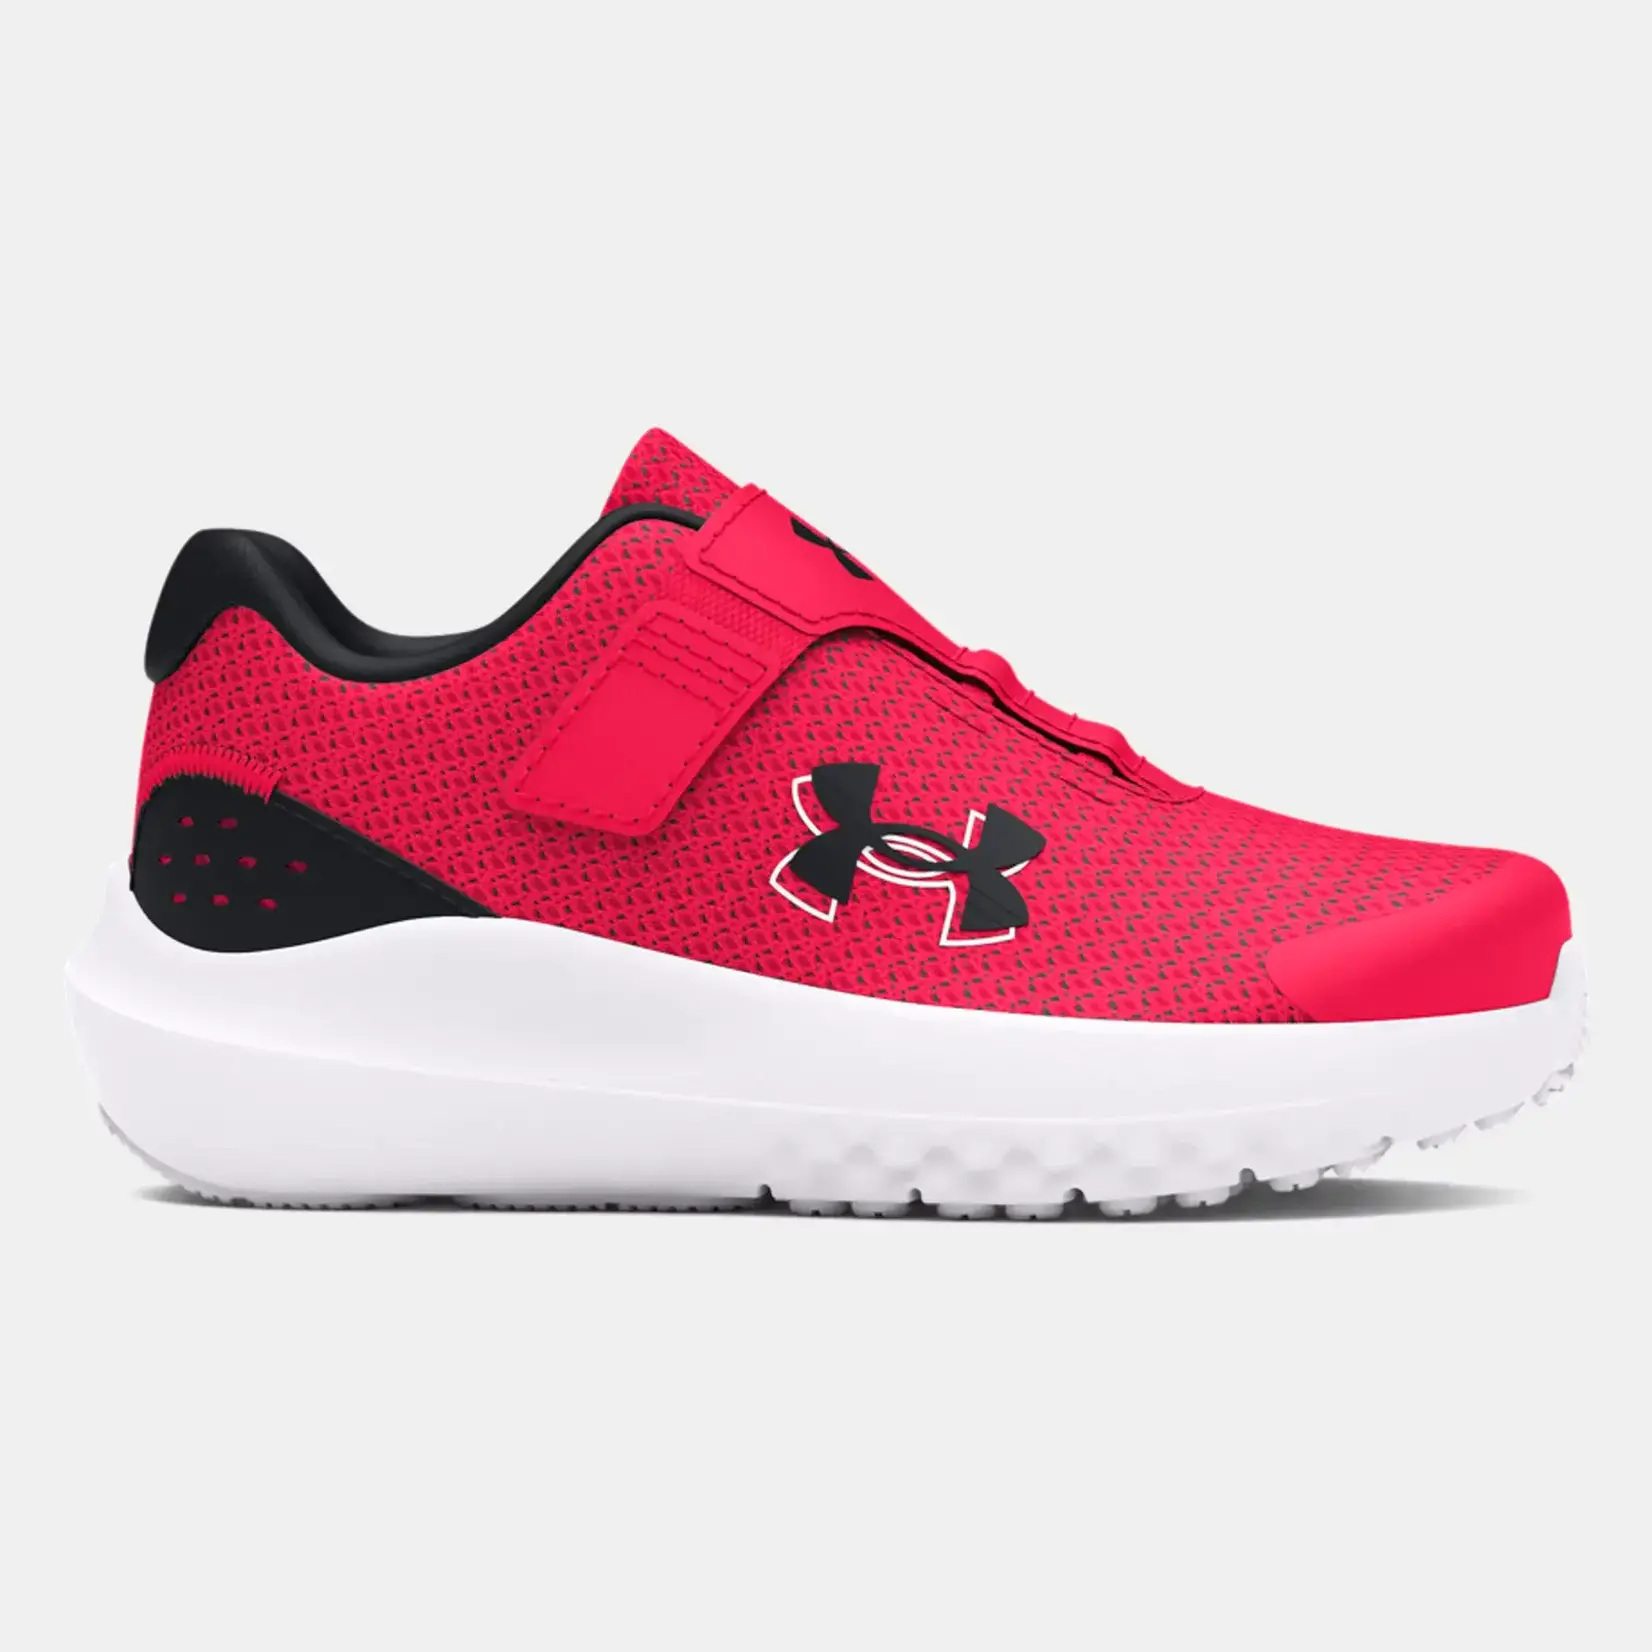 Under Armour Under Armour Running Shoes, Surge 4 AC, Boys